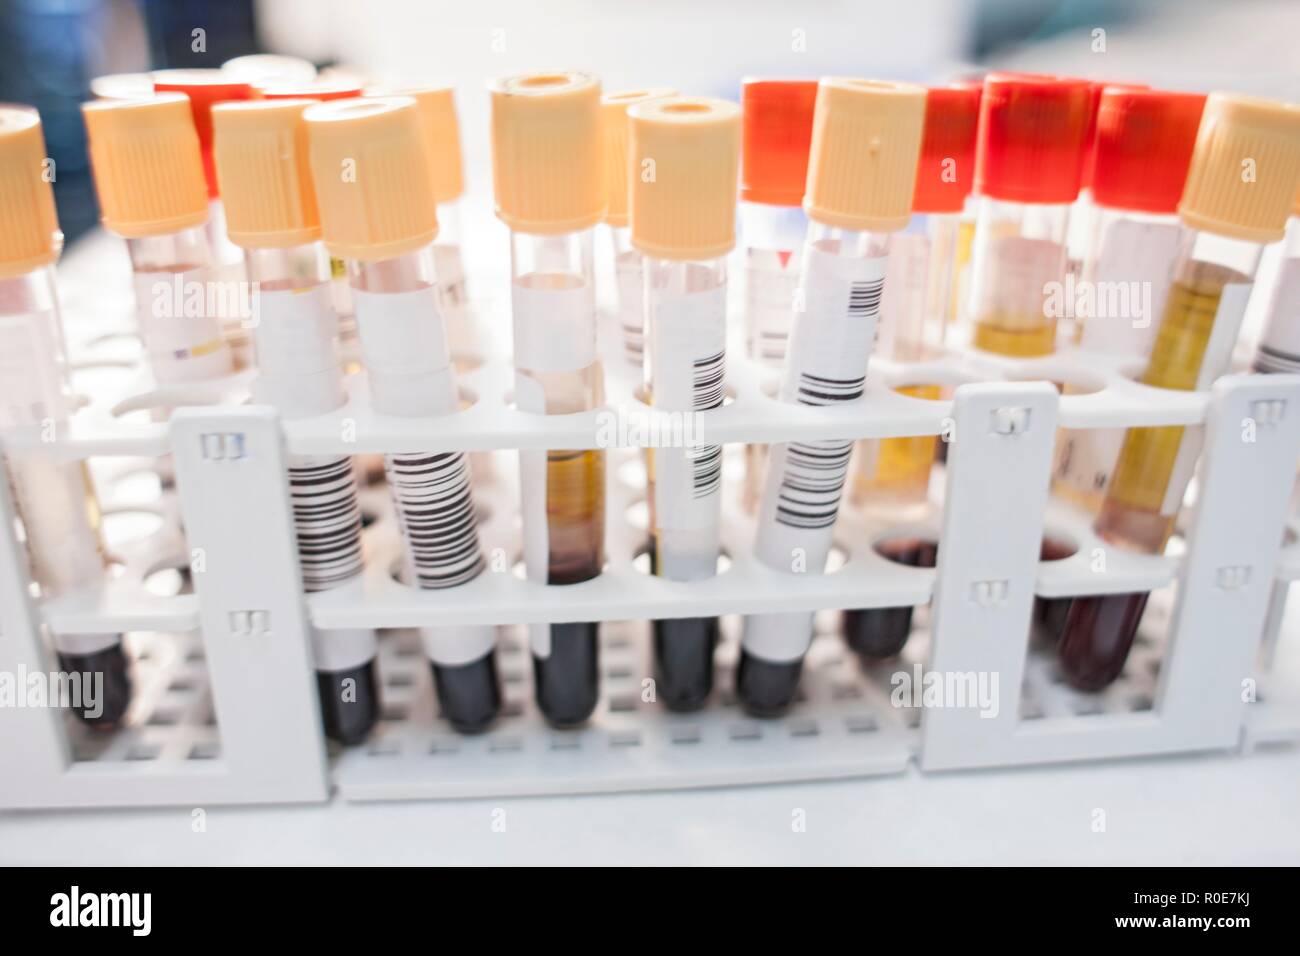 Medical samples in rack, close up. Stock Photo